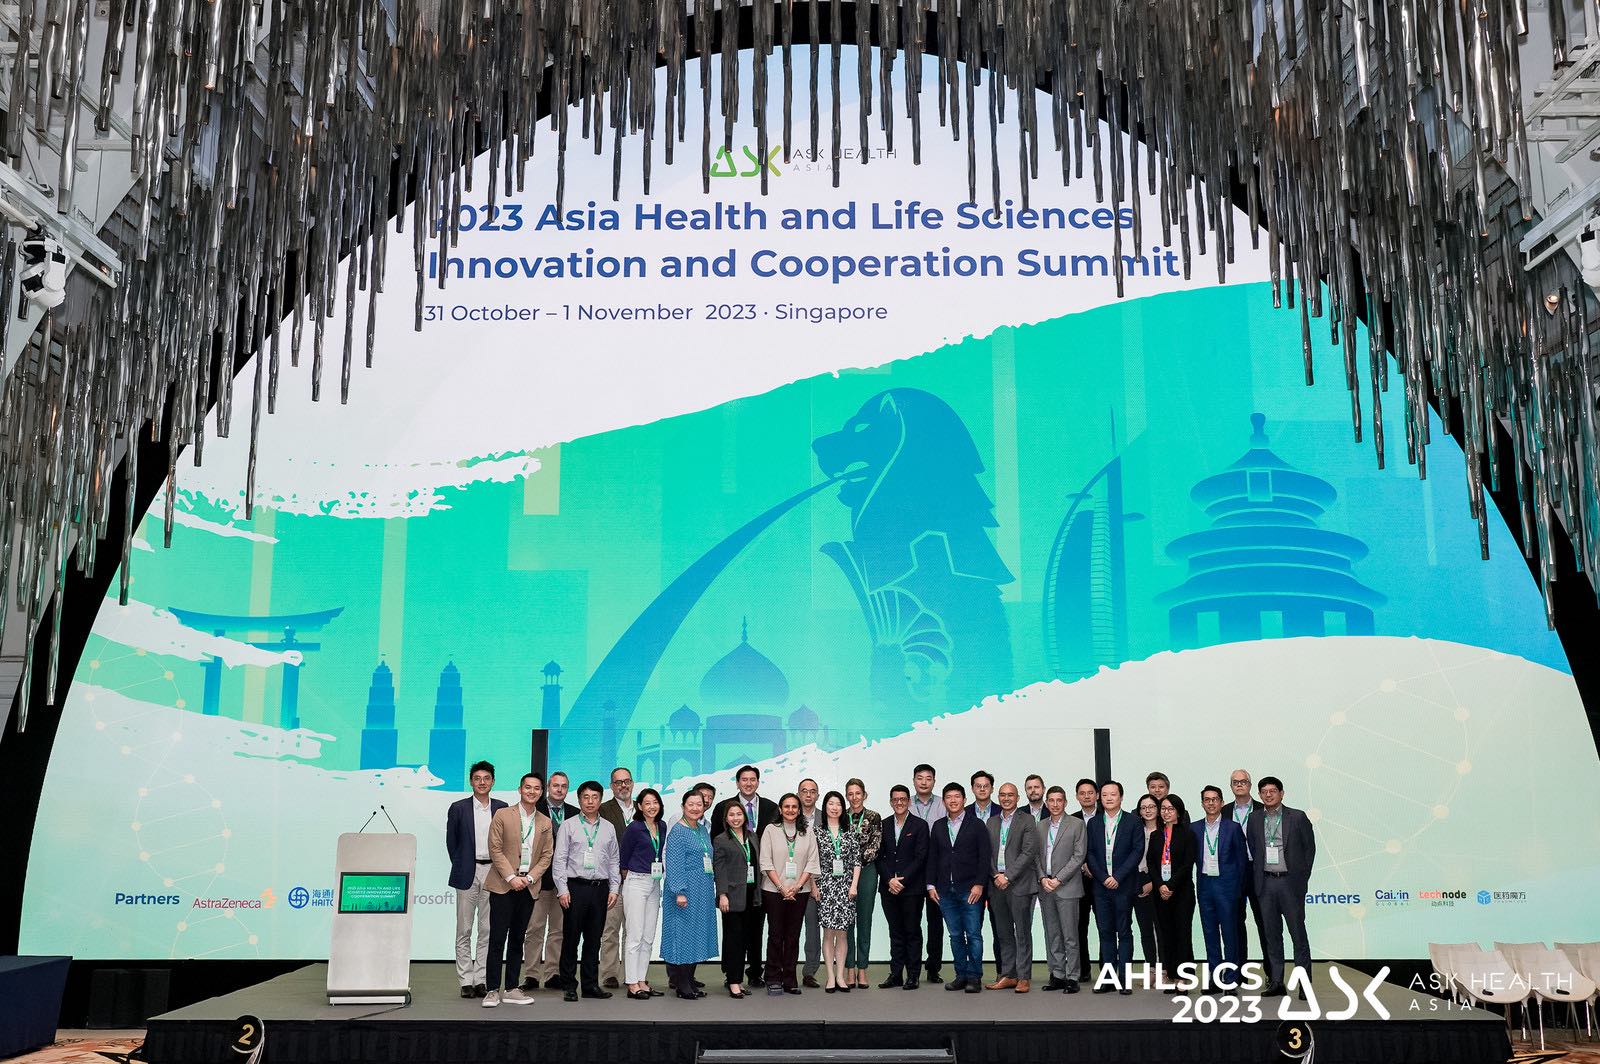 2023 Asia Health and Life Sciences Innovation and Cooperation Summit Group Shot